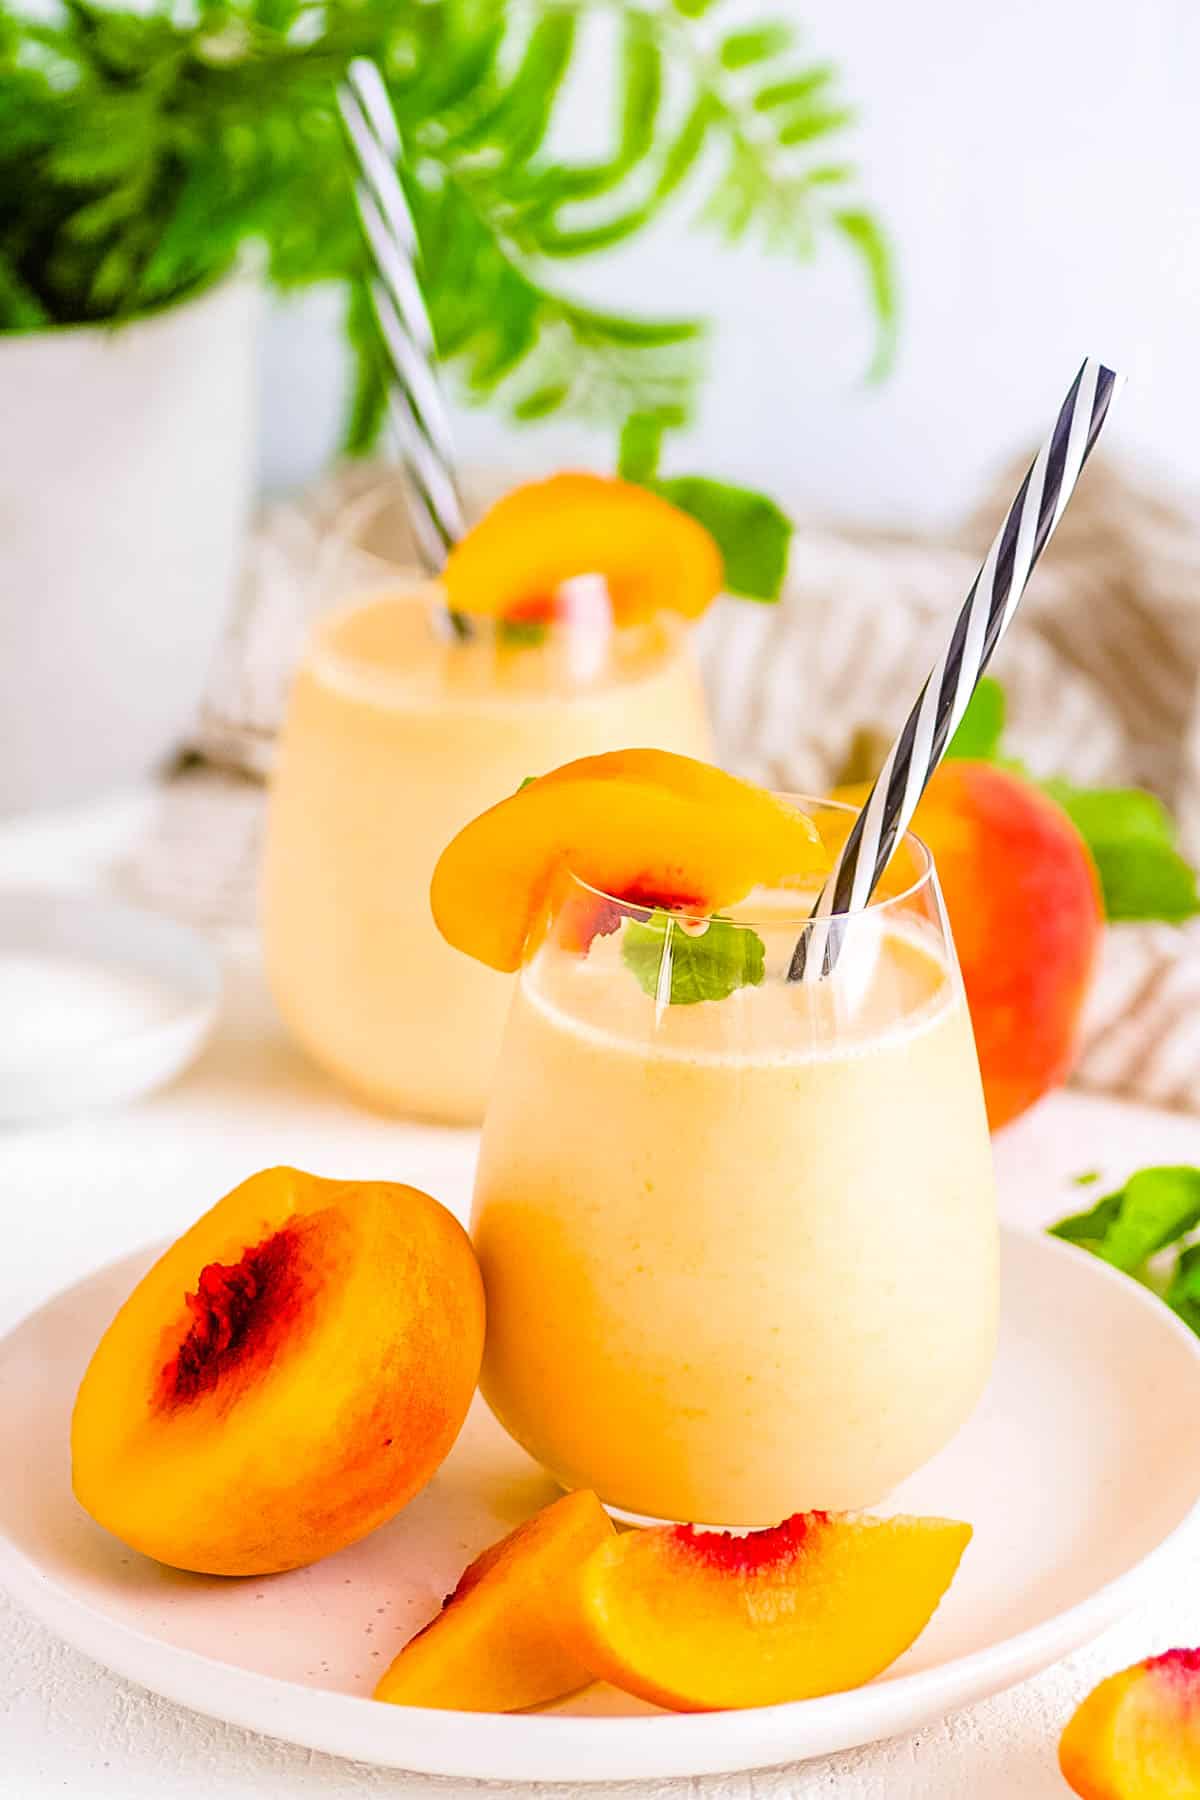 Peach milk drink served in a glass with a straw, garnished with fresh peaches.